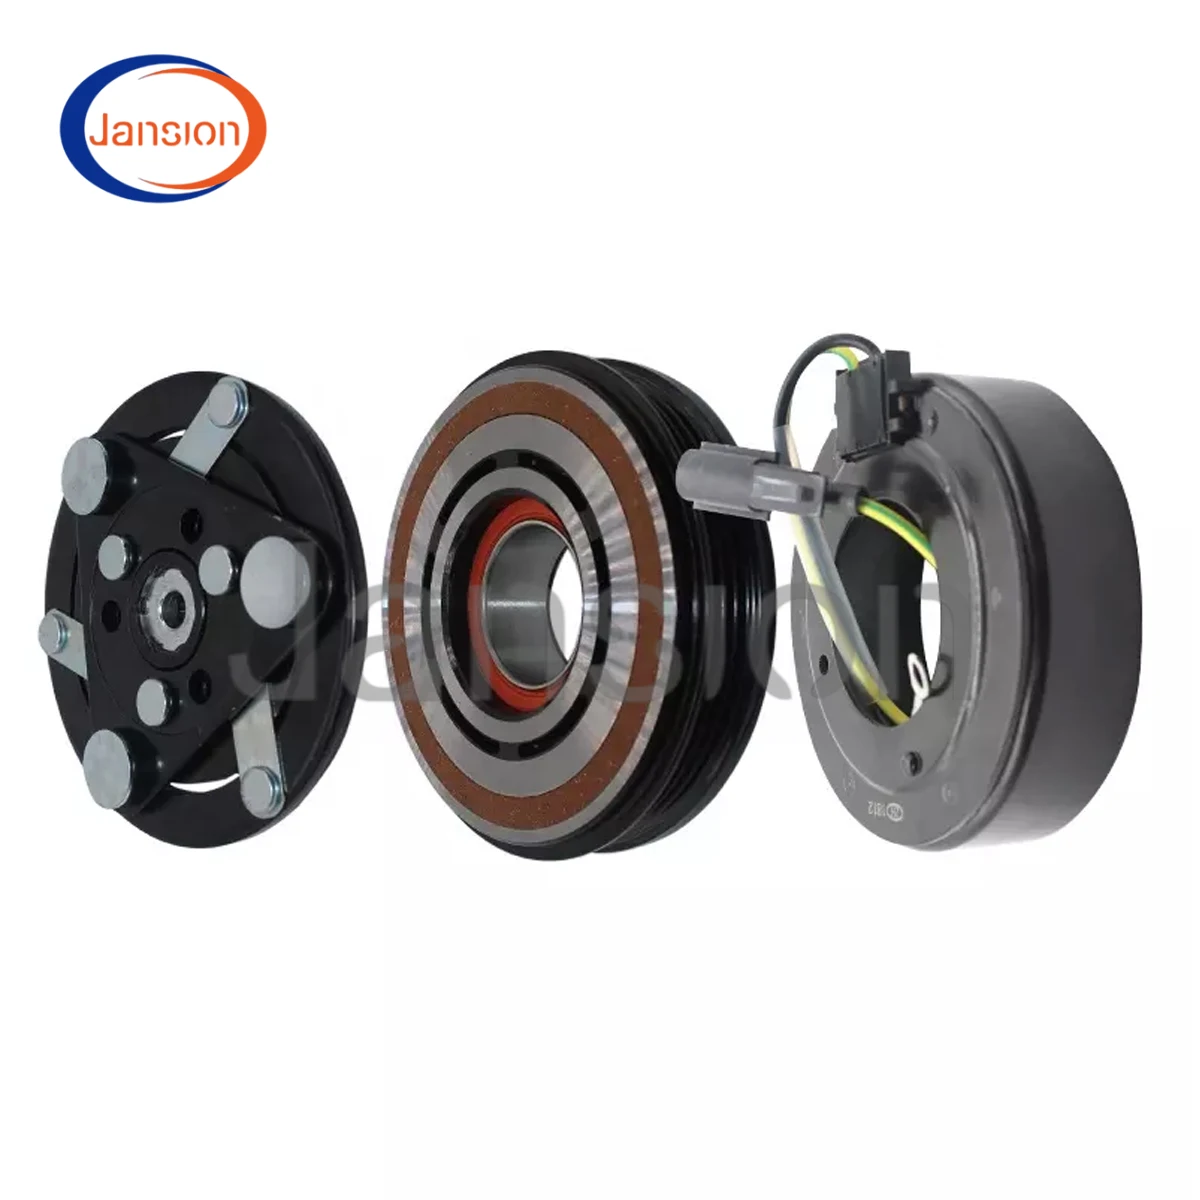 

AC A/C Air Conditioning Compressor Clutch Pulley For Volvo S80 XC60 XC70 S60 II V60 2.4 D3 D4 D5 36001462 36011358 31315453